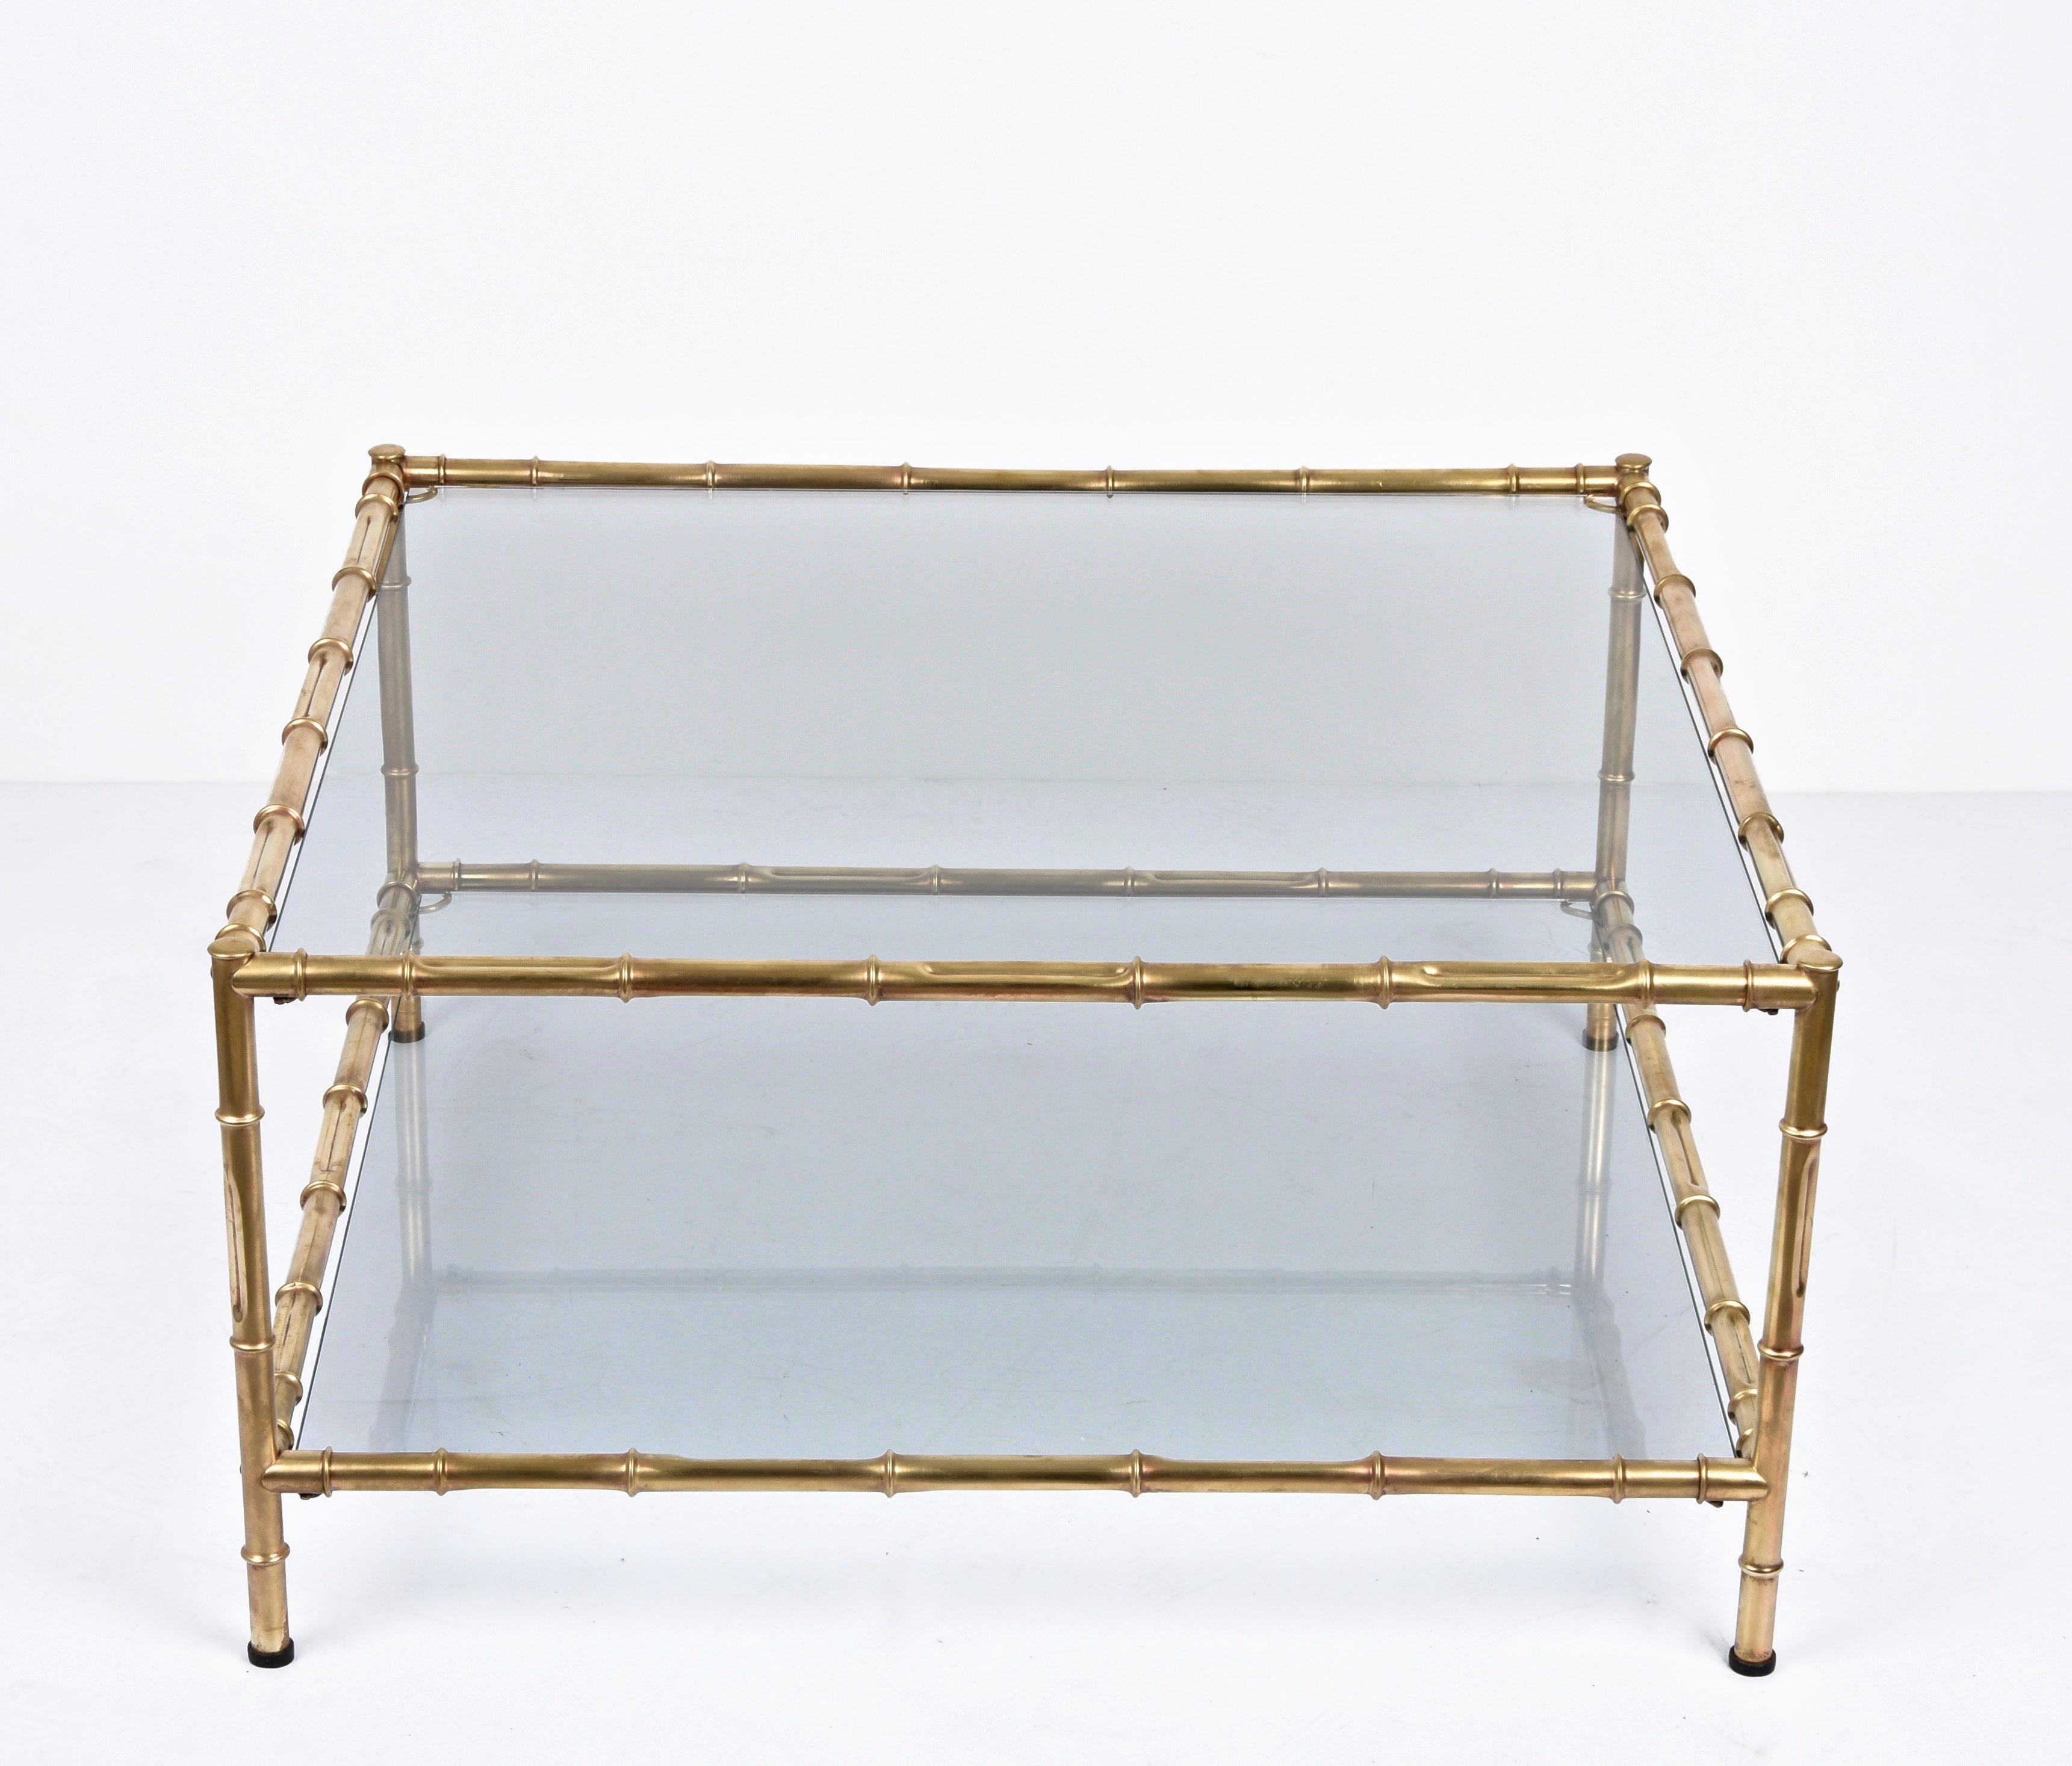 Amazing midcentury modern rectangular coffee table in brass faux bamboo with two-tiers glass tops. This fantastic piece was produced in Italy during the 1970s.

A luxurious item with a bamboo-shaped structure made of brass and two layers of smoked